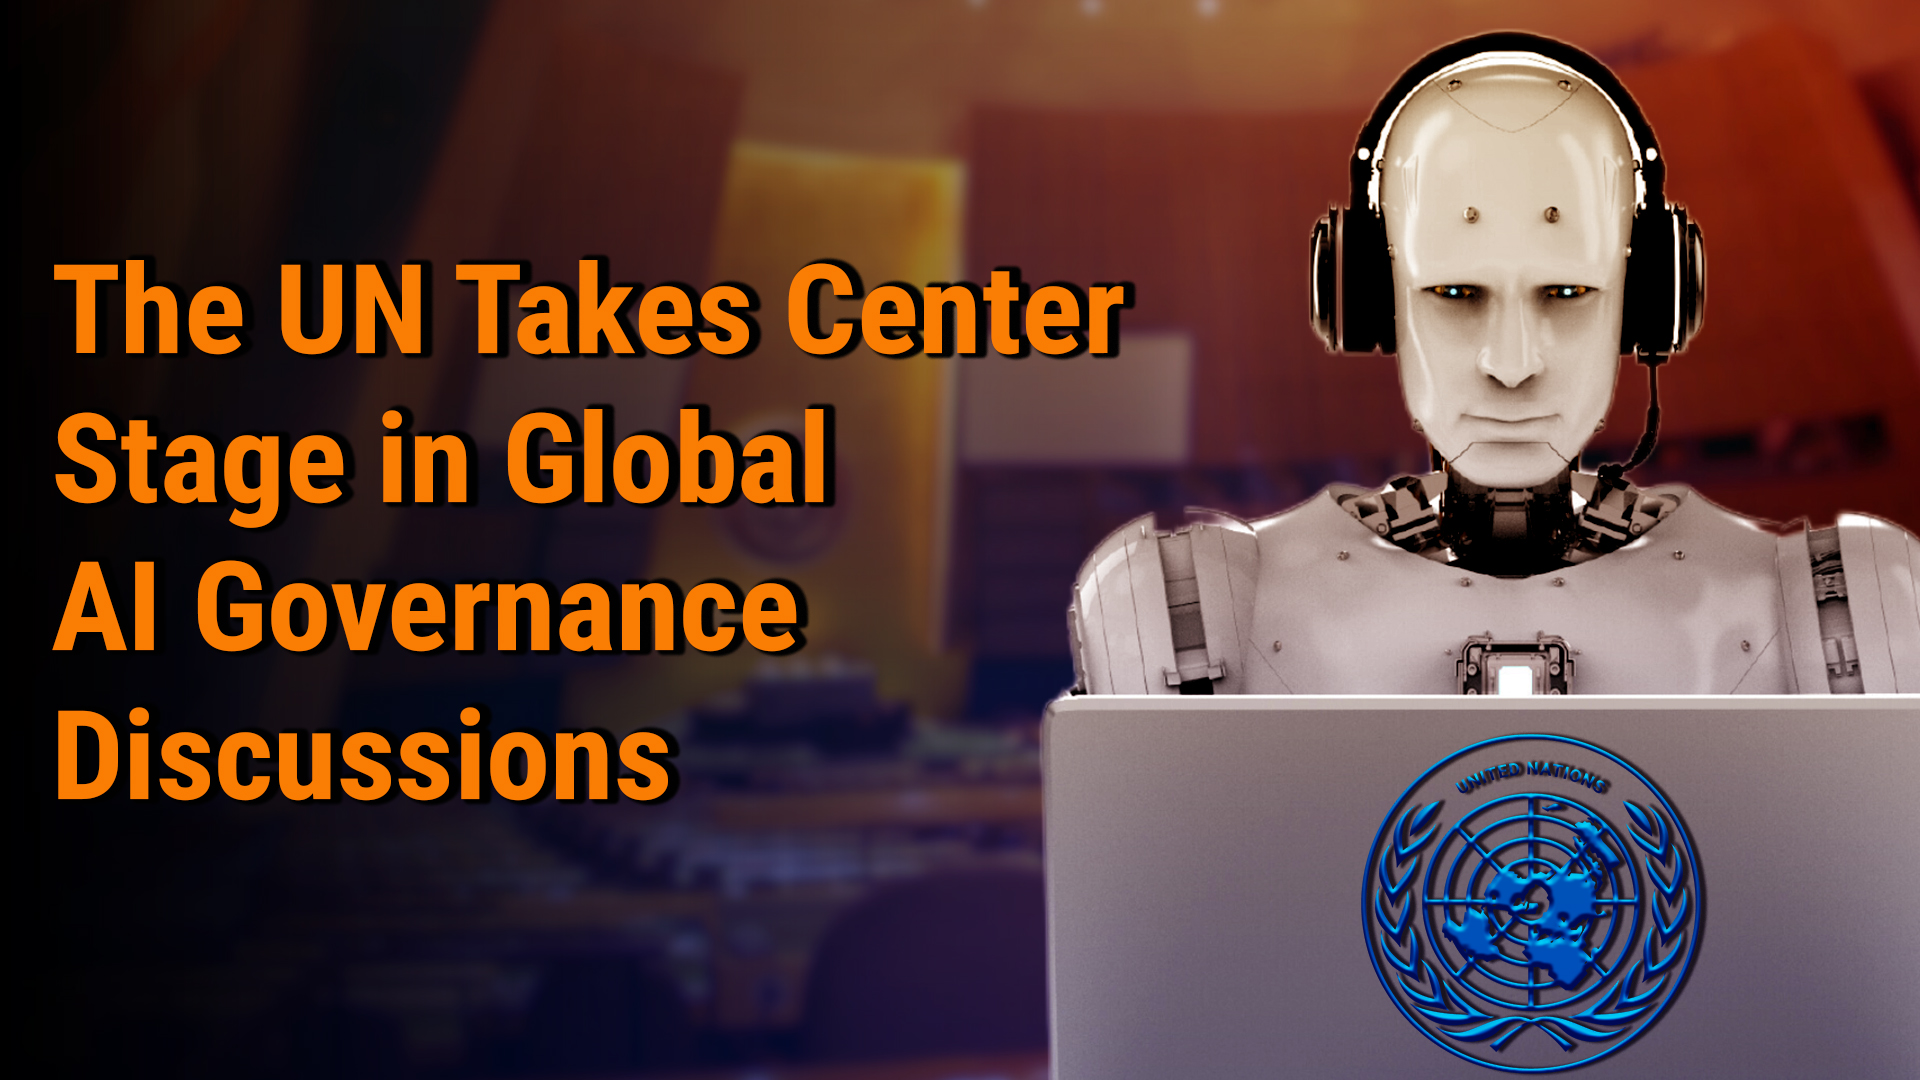 The UN Takes Center Stage in Global AI Governance Discussions